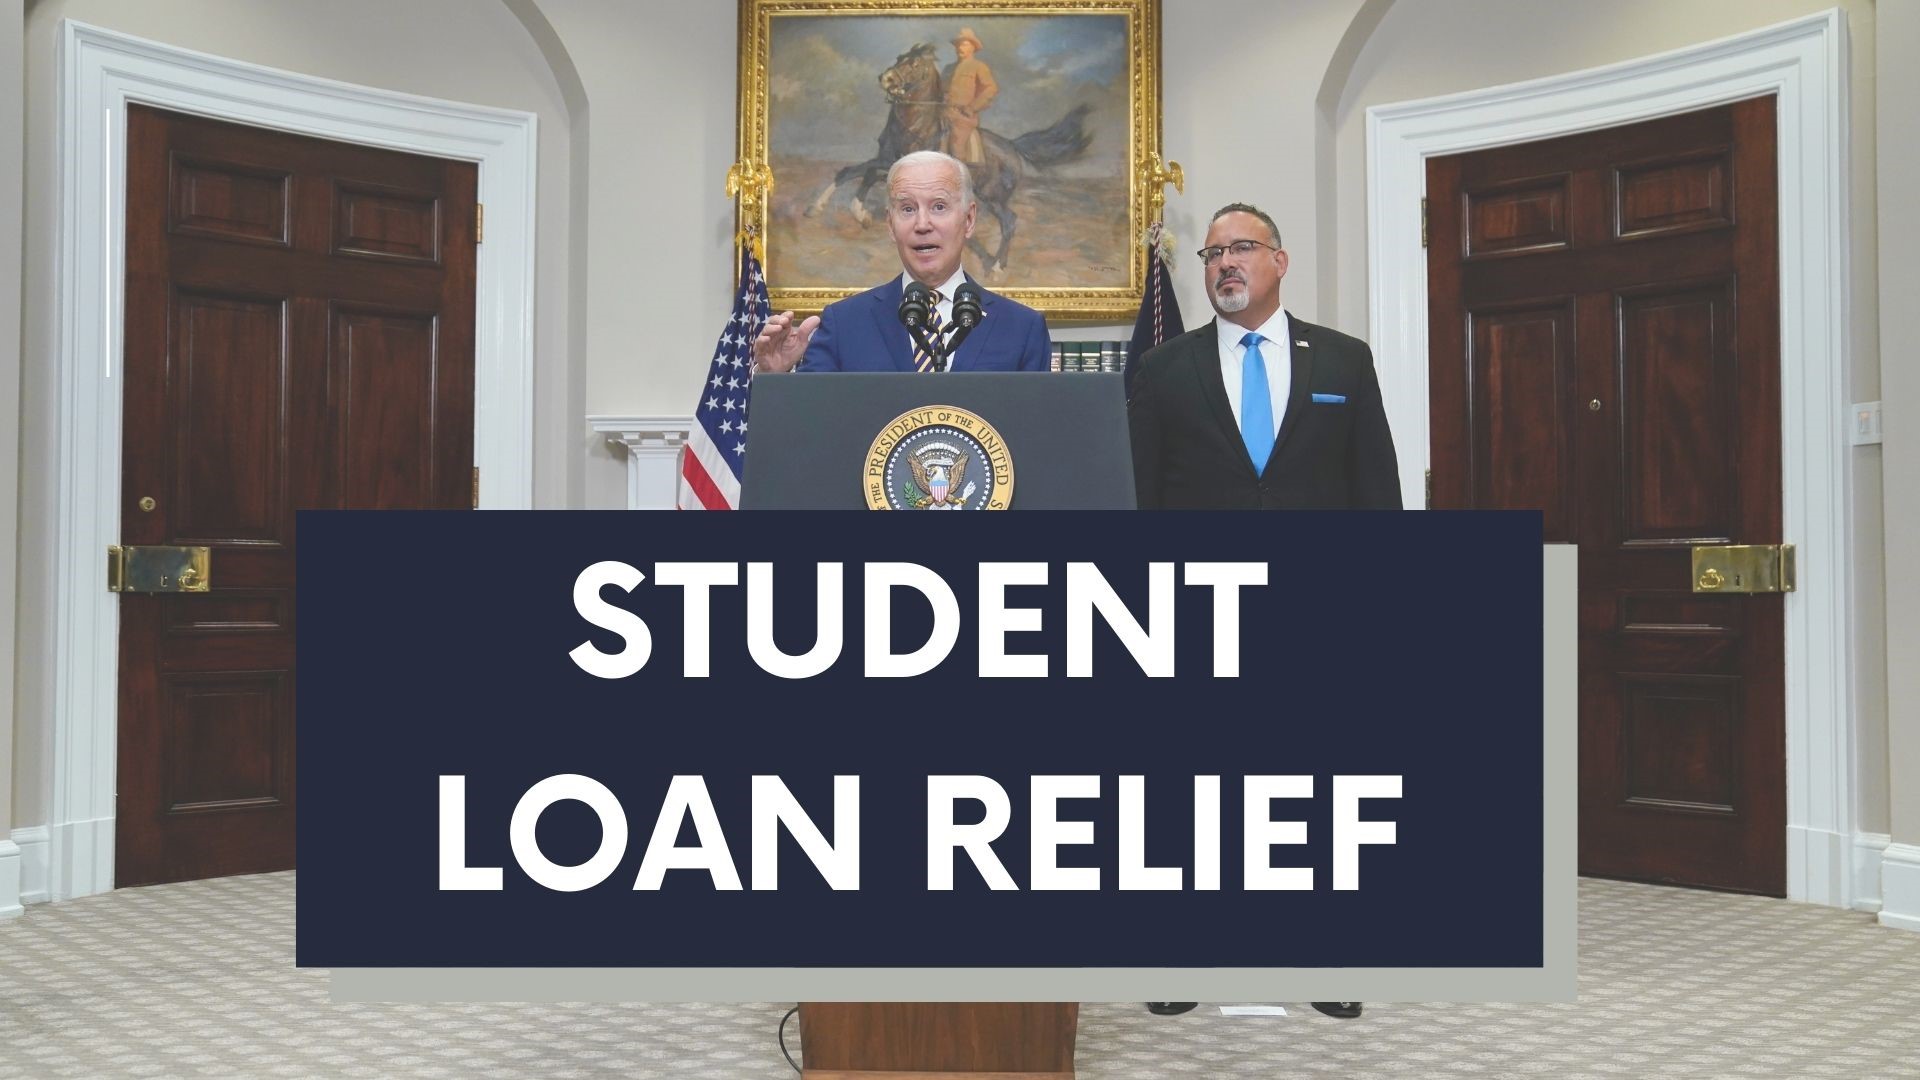 President Biden announces his plan for student loan debt forgiveness, including a final extension for the payment freeze.